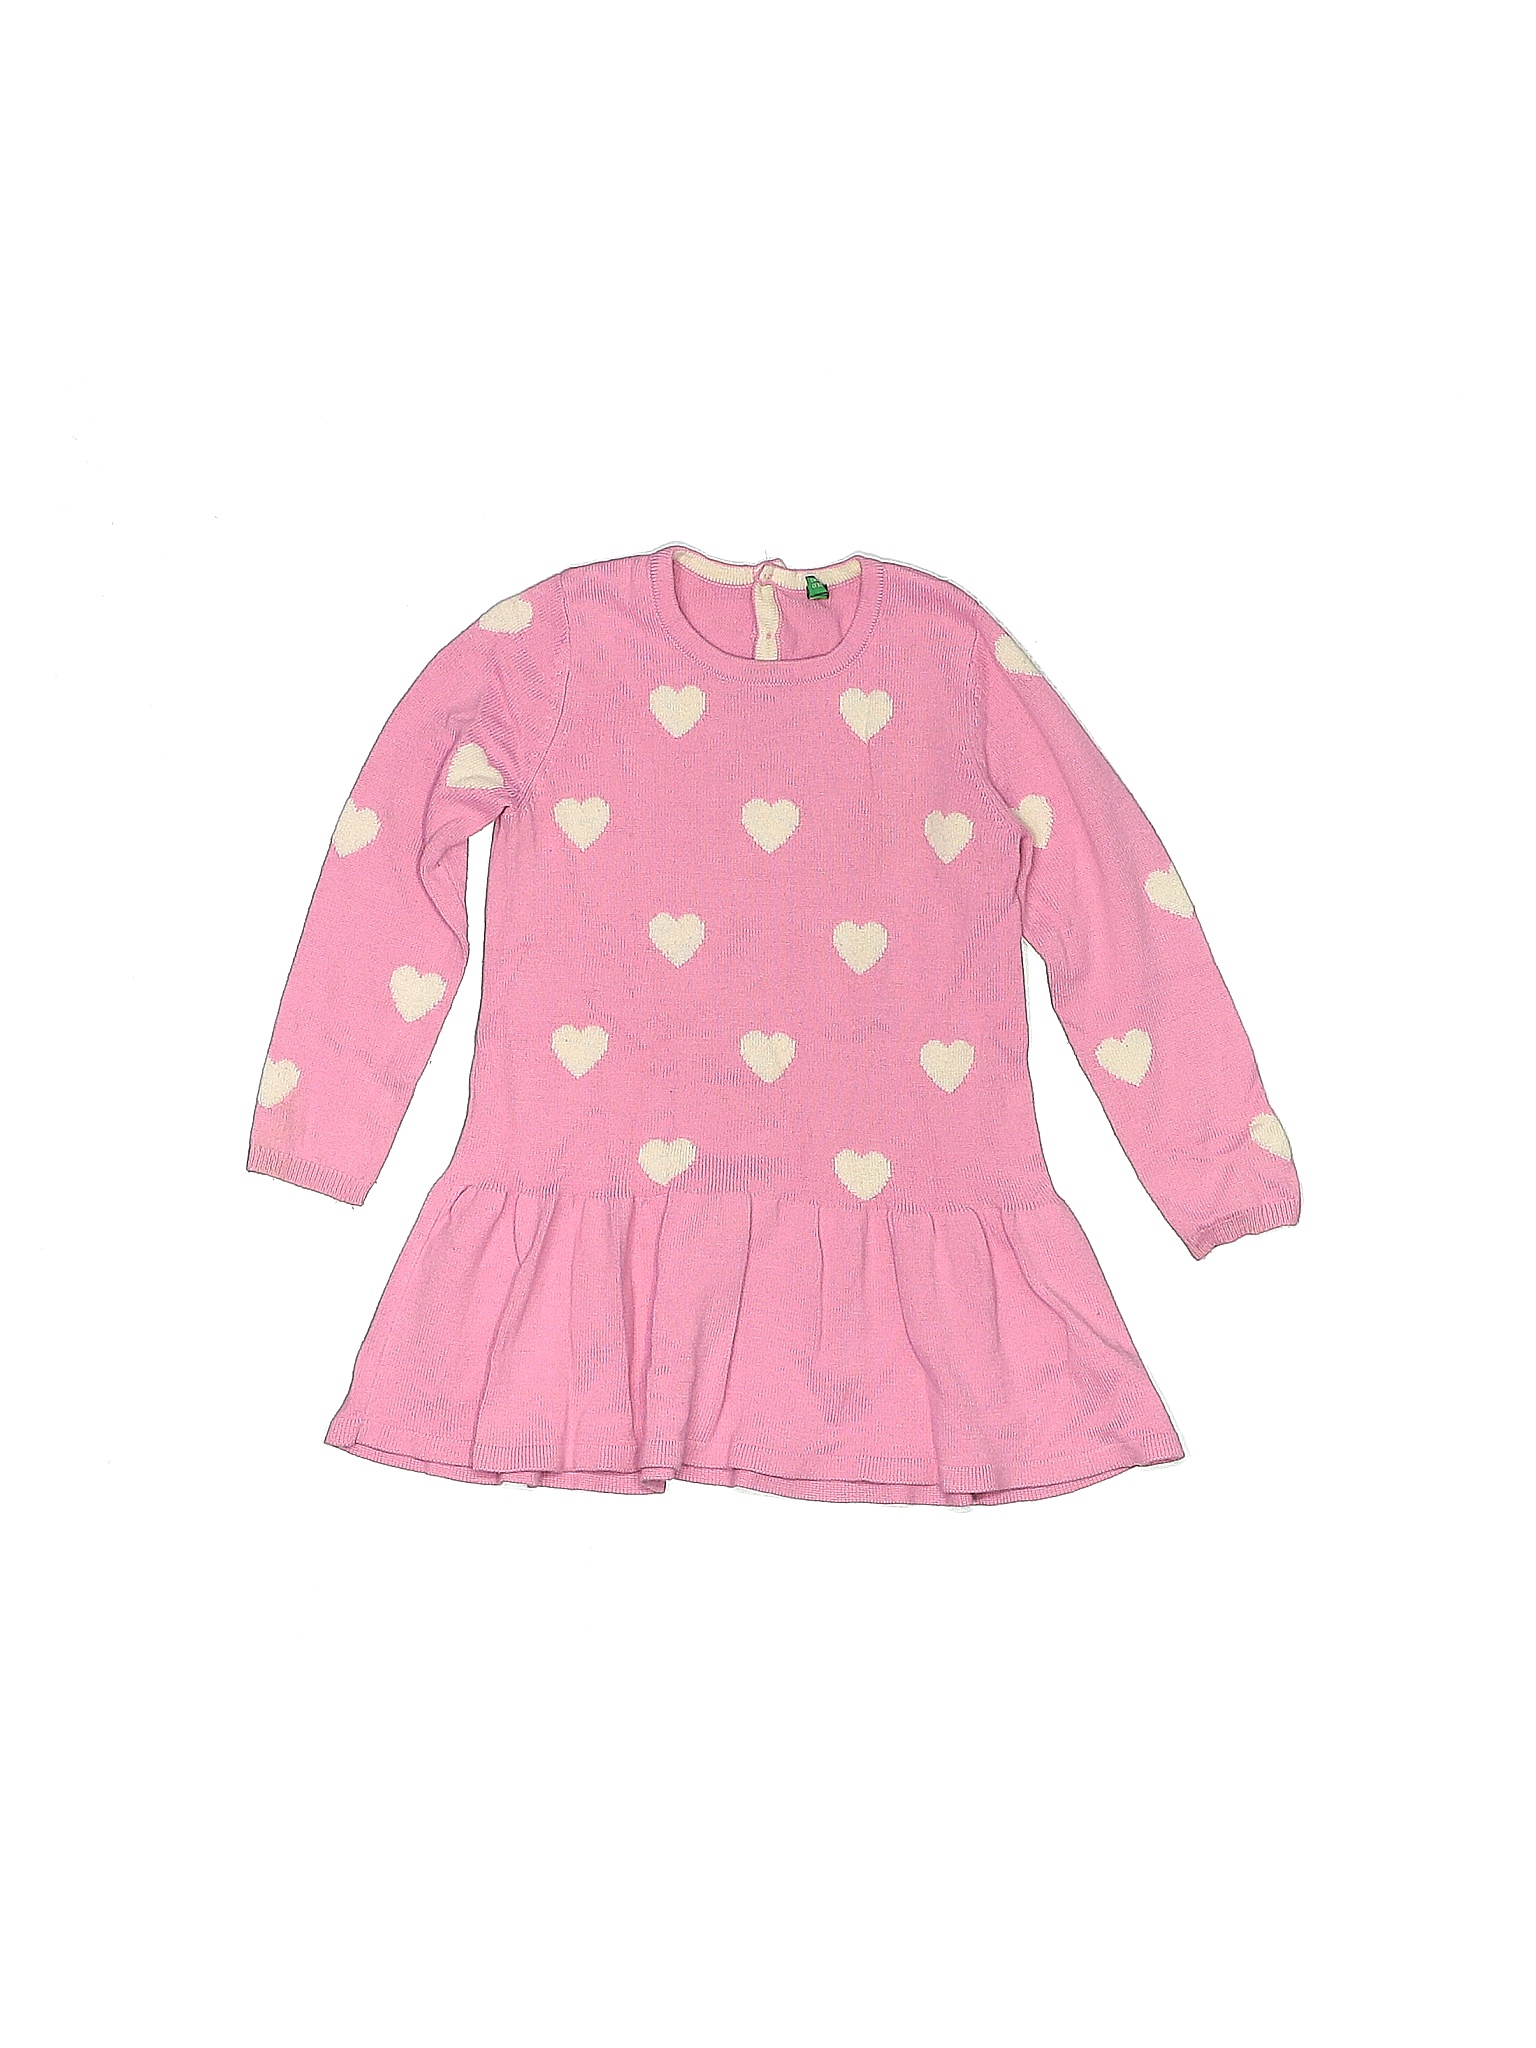 United Colors Of Benetton Polka Dots Pink Dress Size 2 - 72% off | thredUP